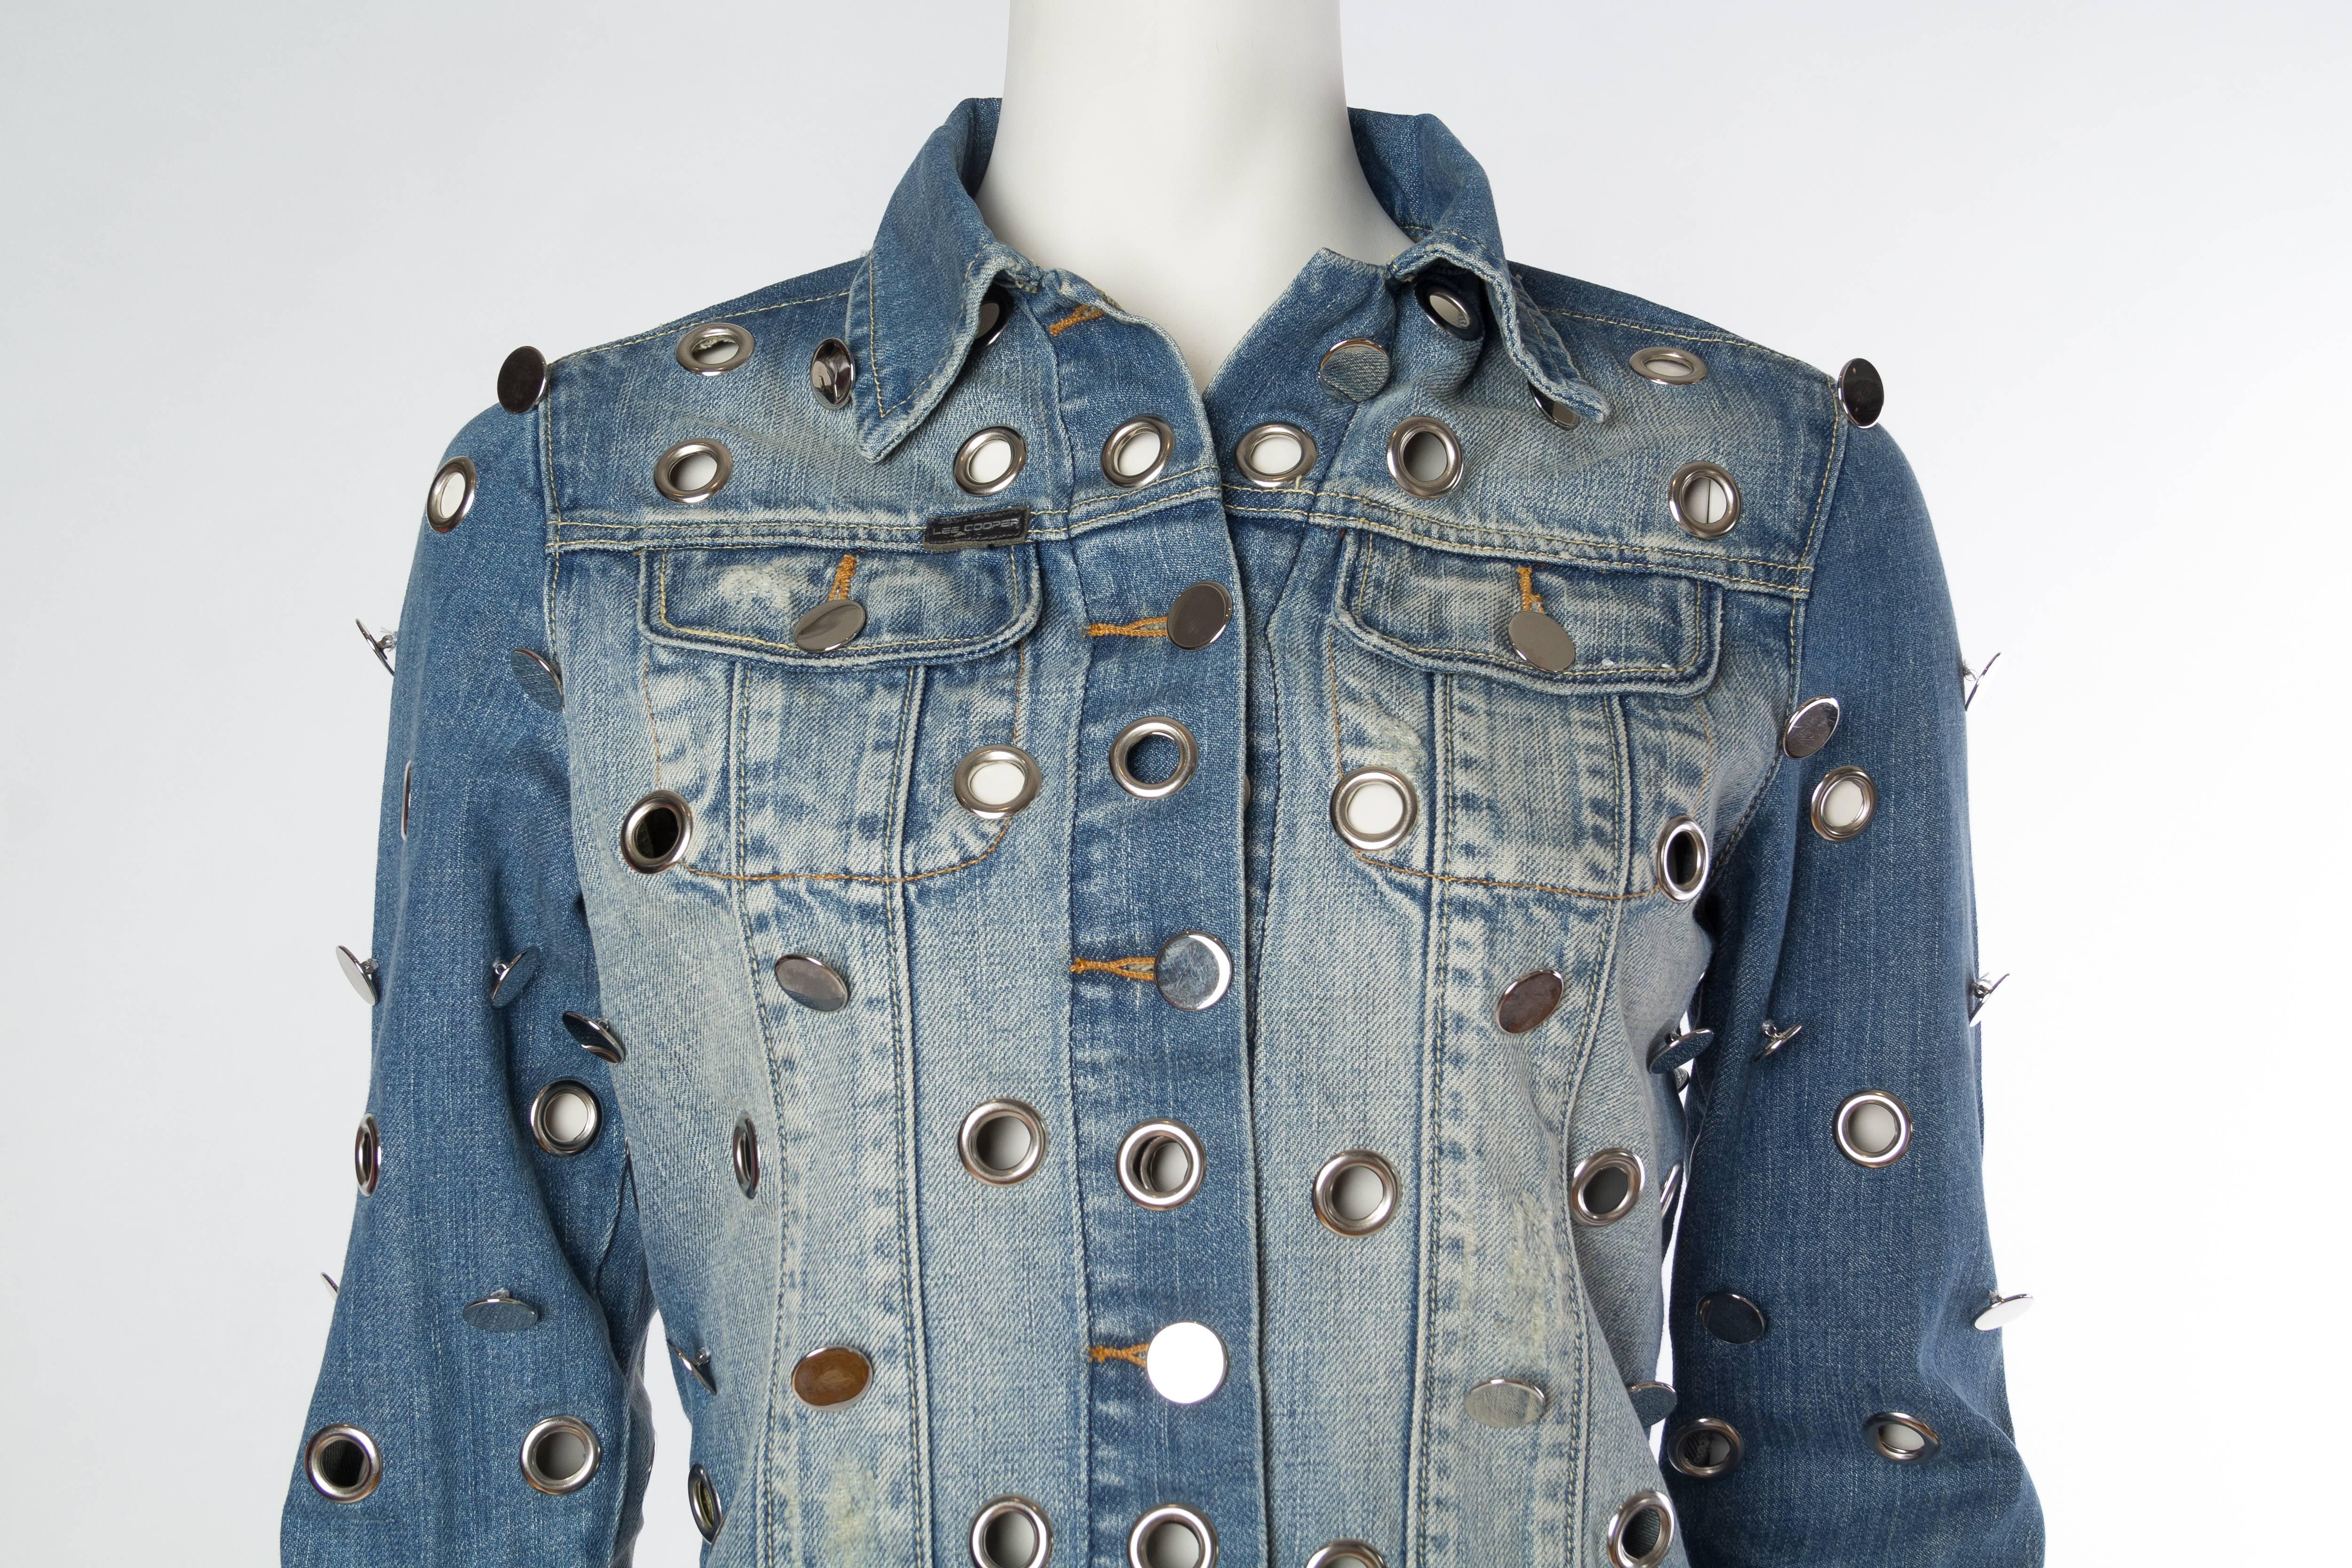 Denim Jacket Covered in Mirrored Buttons and Gromets 2